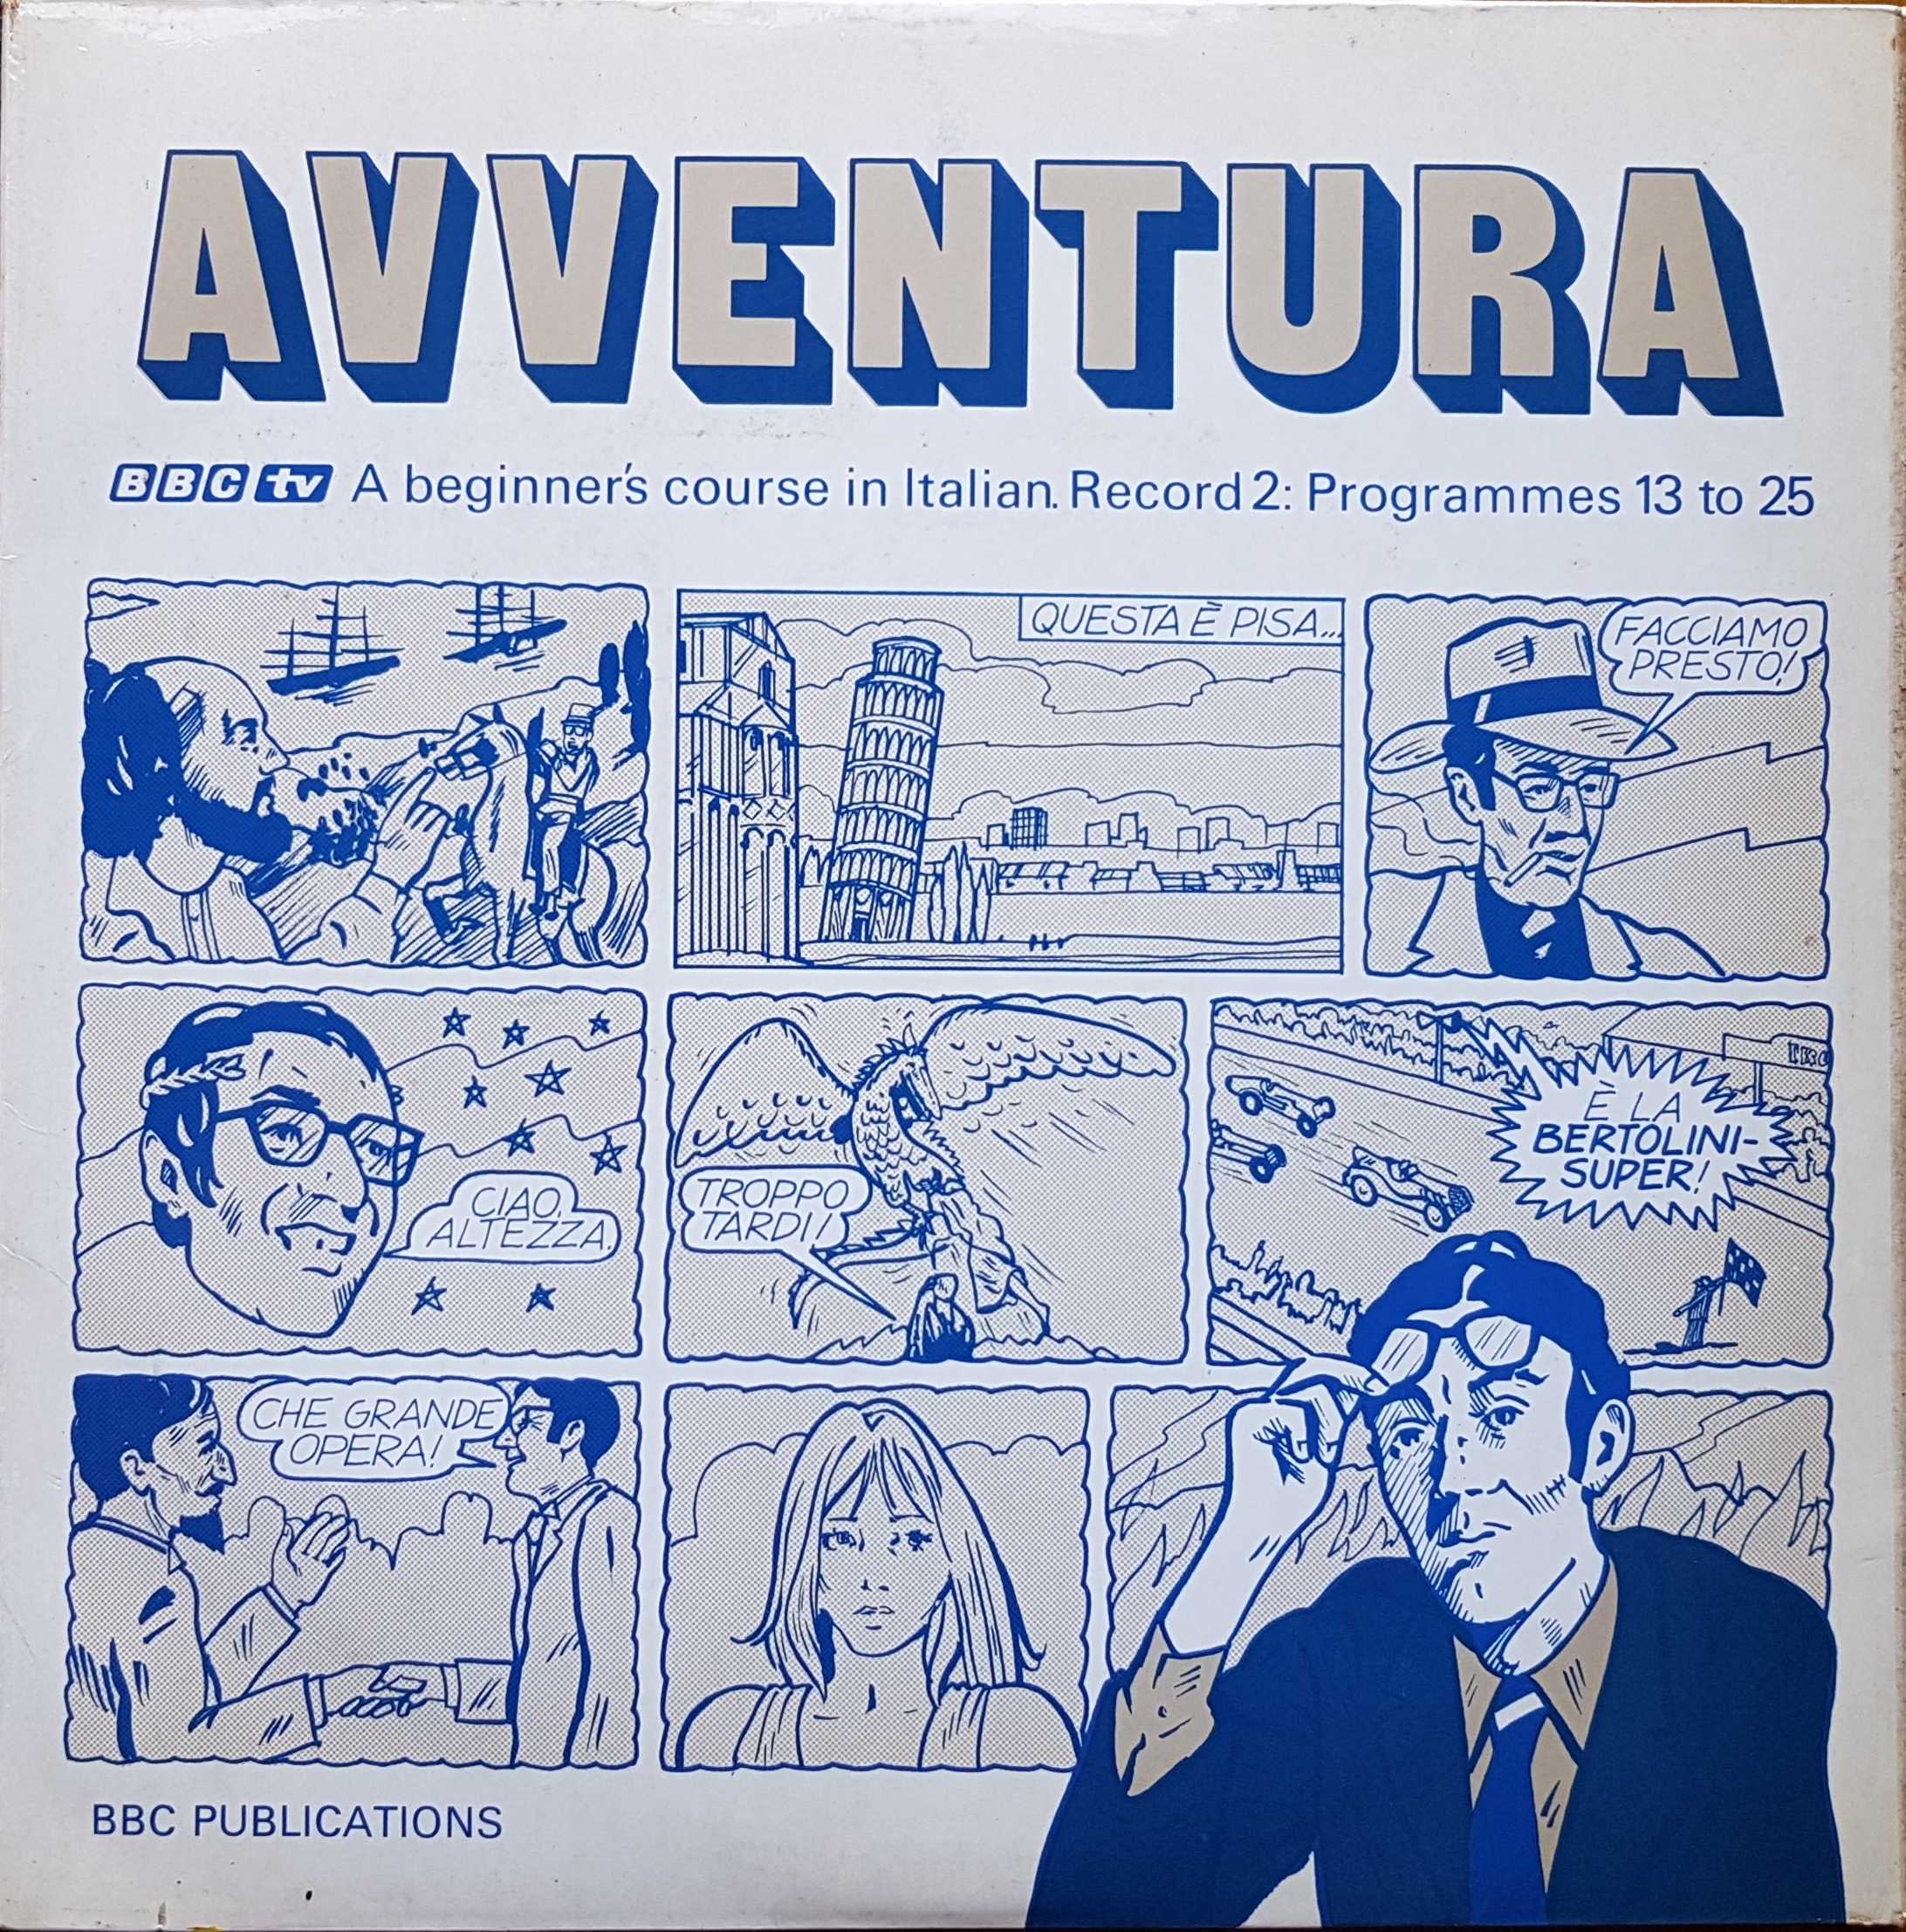 Picture of OP 179/180 Avventura - A beginner's course in Italian - Record 2 - Programmes 13 - 25 by artist Alfio Bernabei / Romolo Bruni from the BBC albums - Records and Tapes library